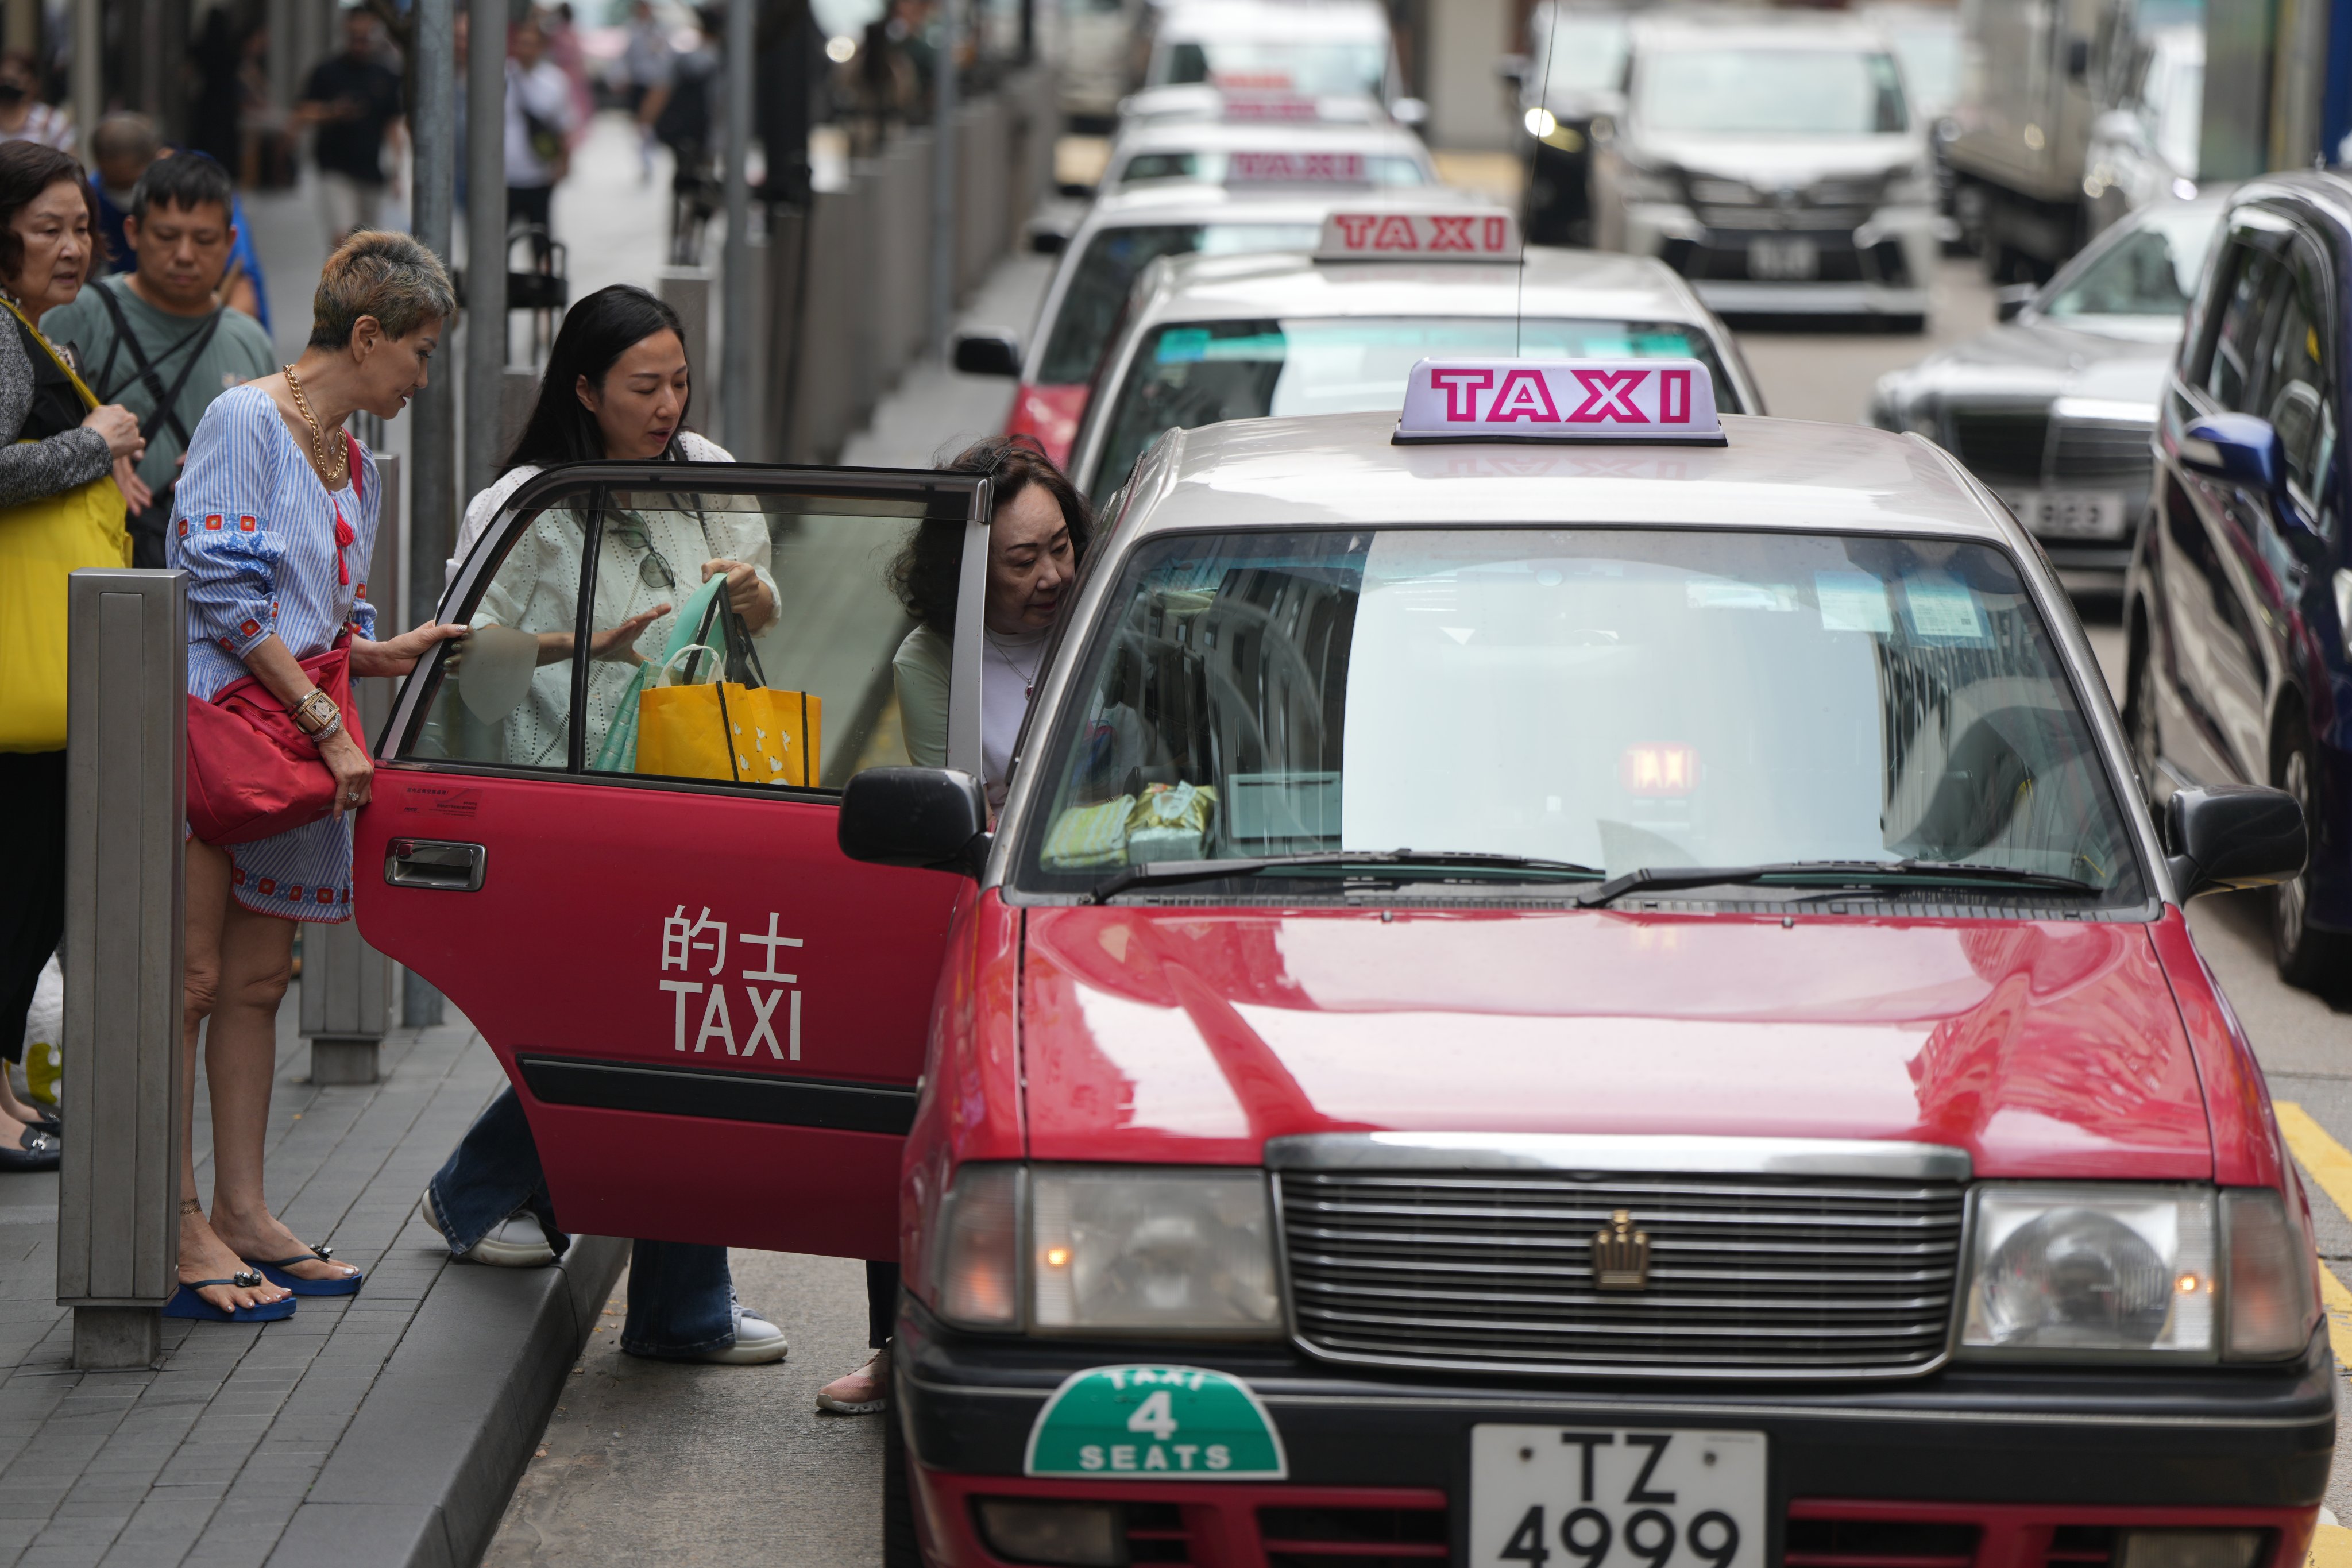 Passengers get into taxis in Causeway Bay on May 7. Both the taxi industry and ride-hailing services such as Uber ought to be better regulated. Photo: Sam Tsang